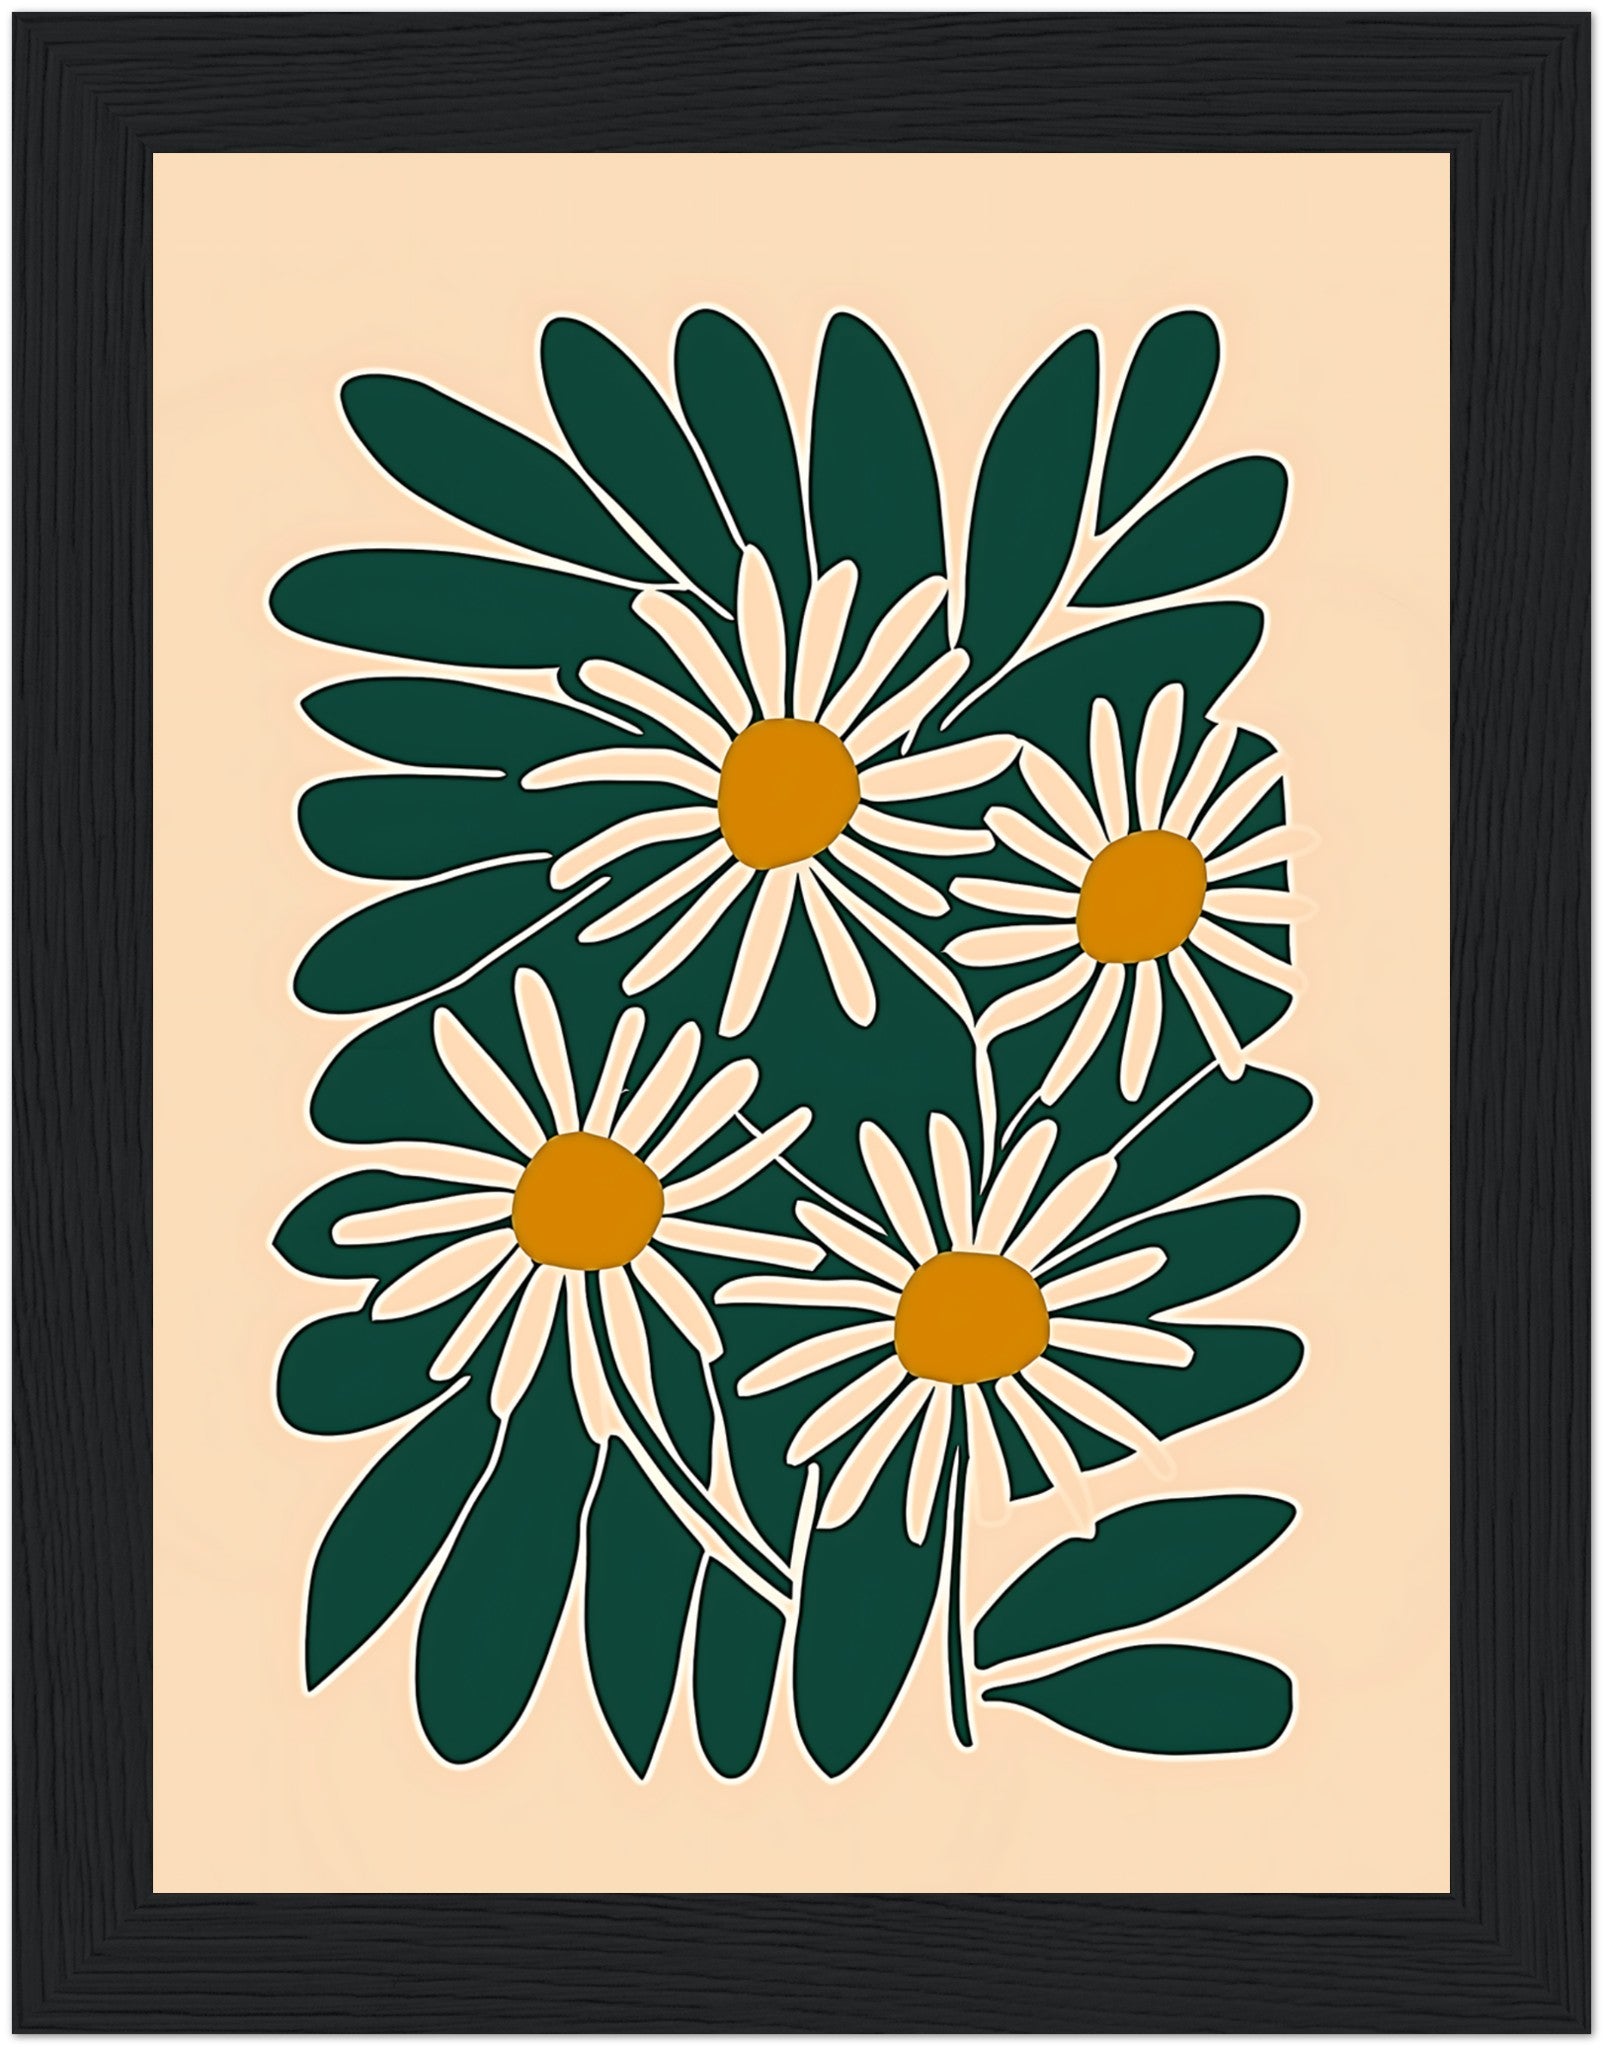 An illustration of five stylized daisies with green leaves in a brown frame.